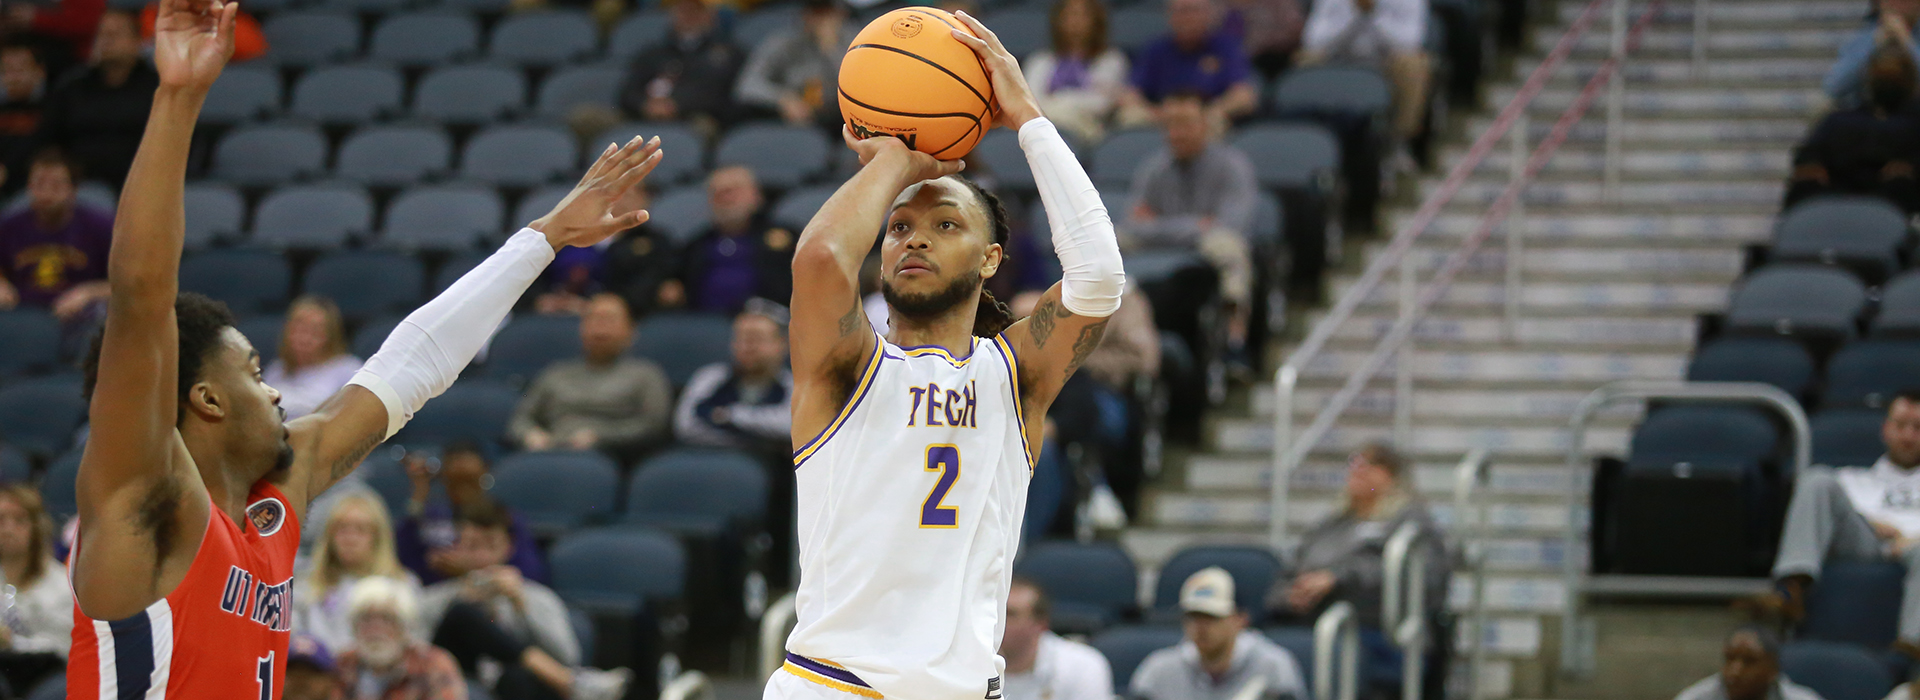 No. 2 Golden Eagles down No. 3 Skyhawks for first OVC Championship game bid since 2011